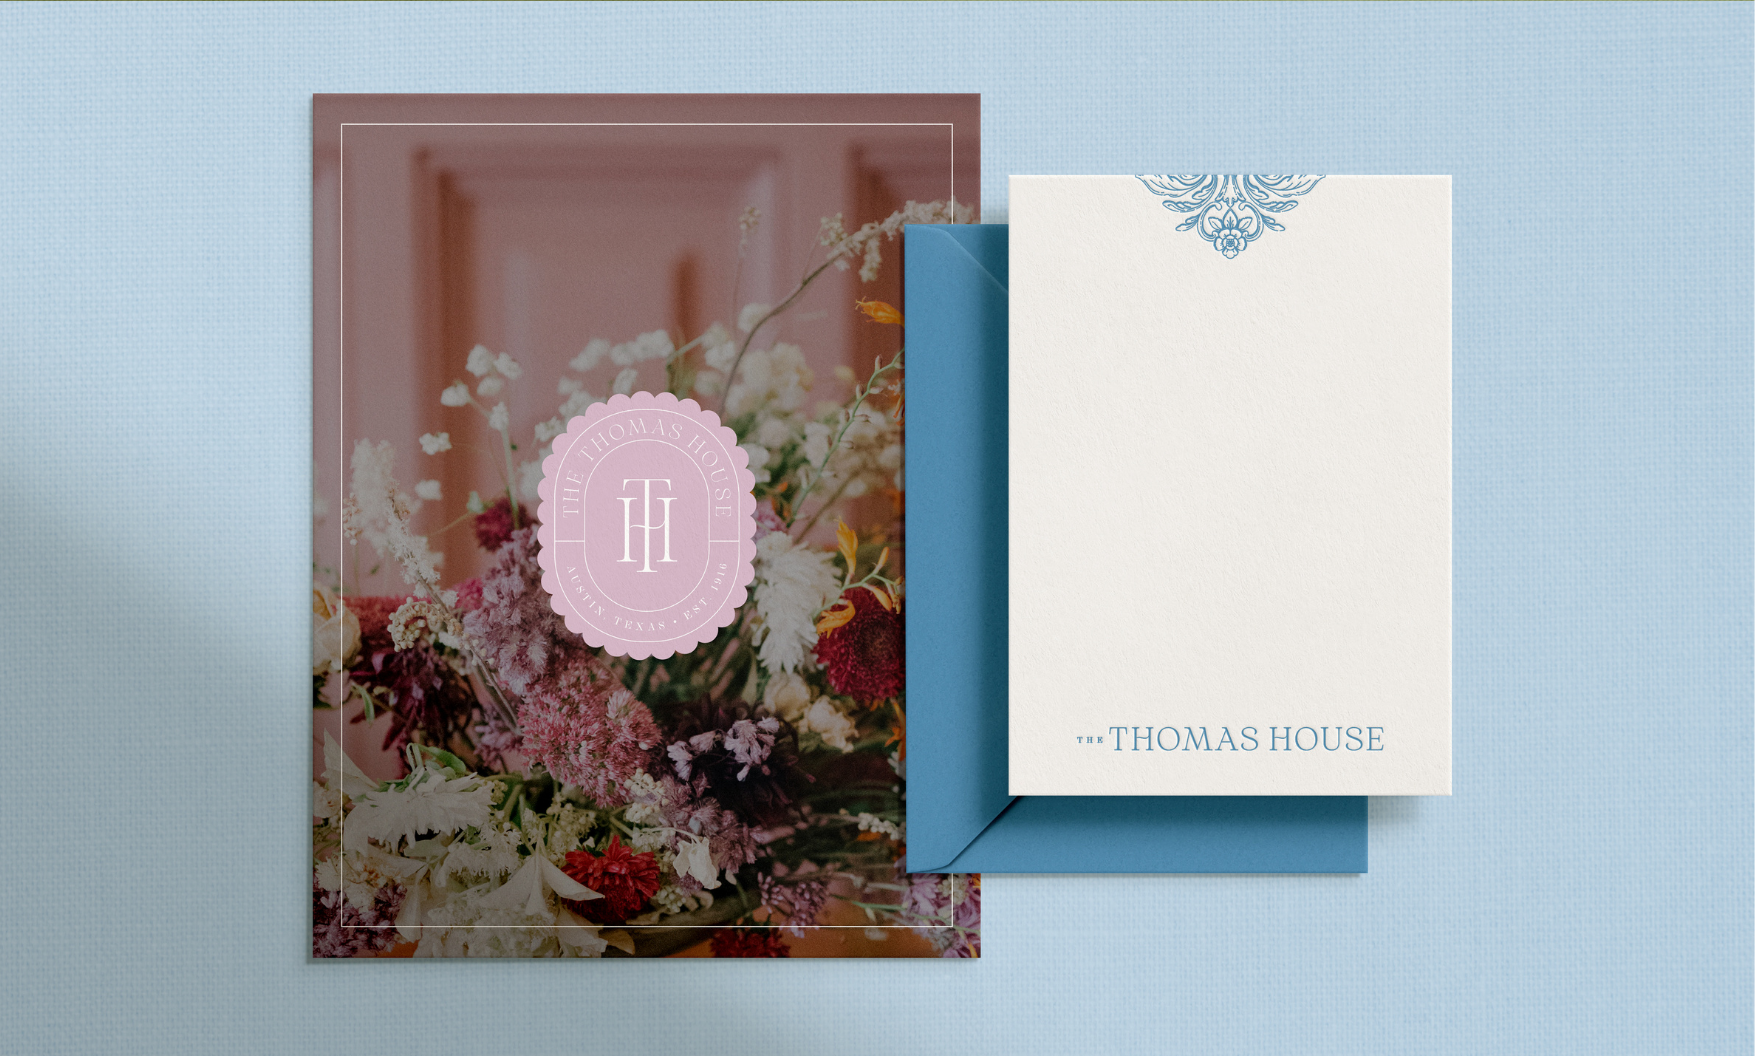 Whimsical Romantic Wedding Venue Brand inspired by the Regency Era - The Thomas House - by Sarah Ann Design